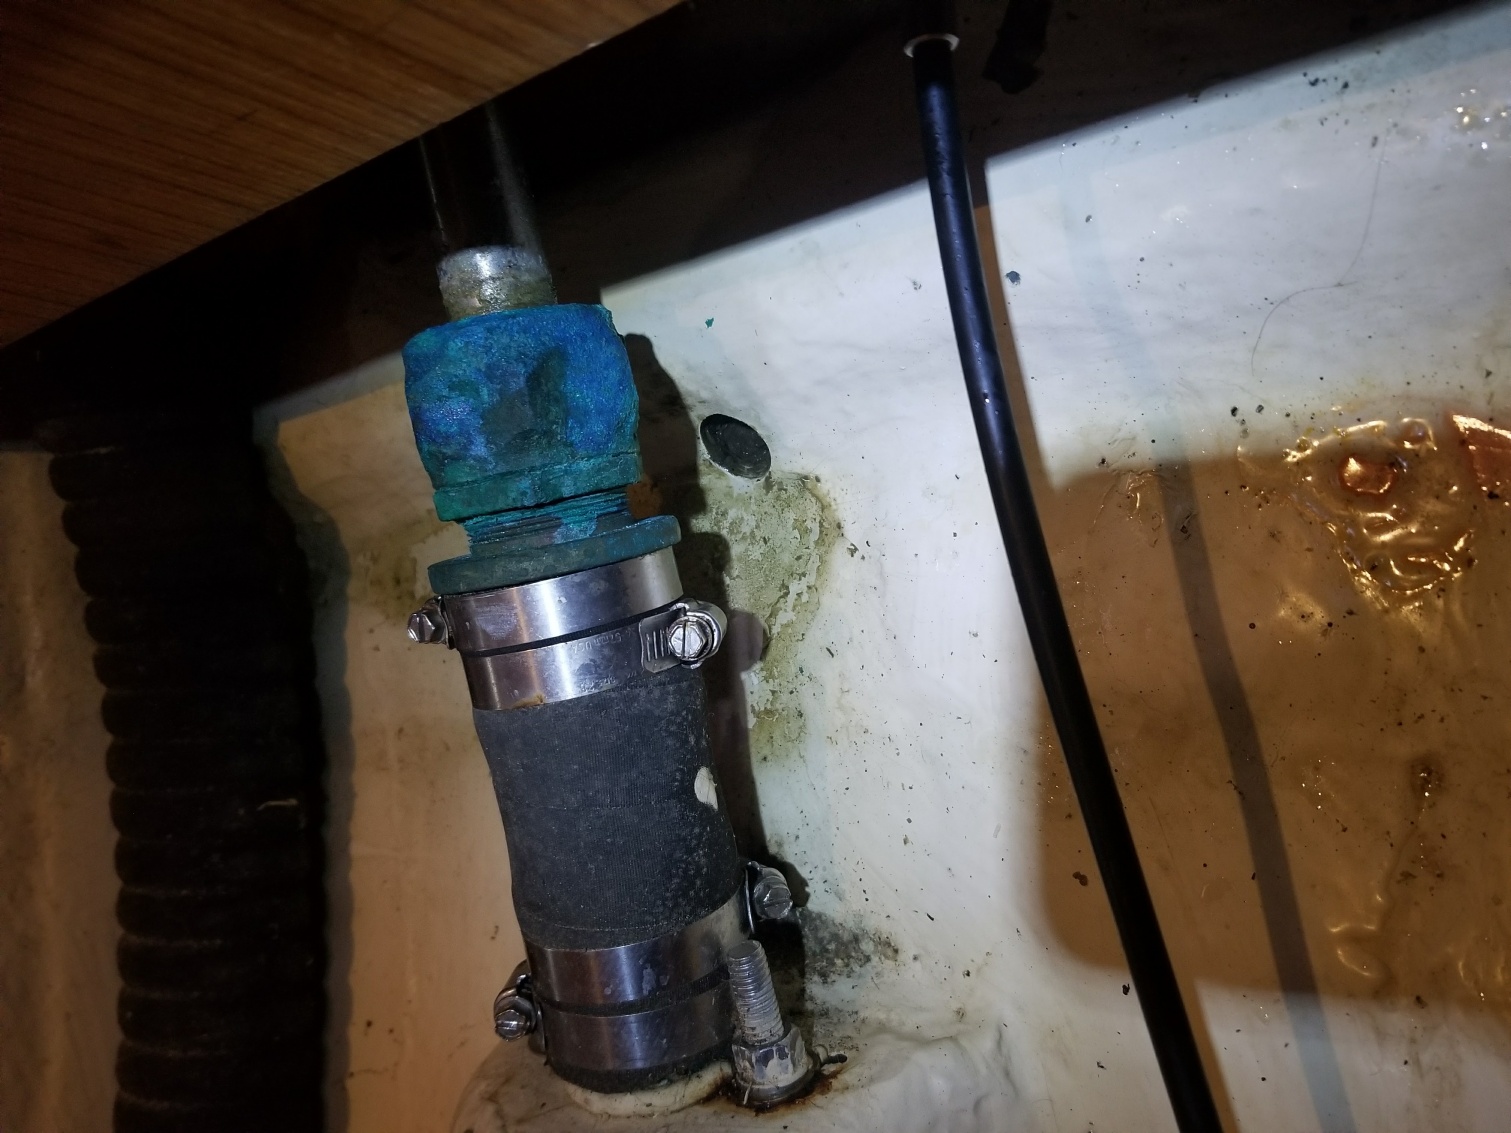 Leak Around Drive Shaft - How Bad Is This? - Cruisers & Sailing Forums